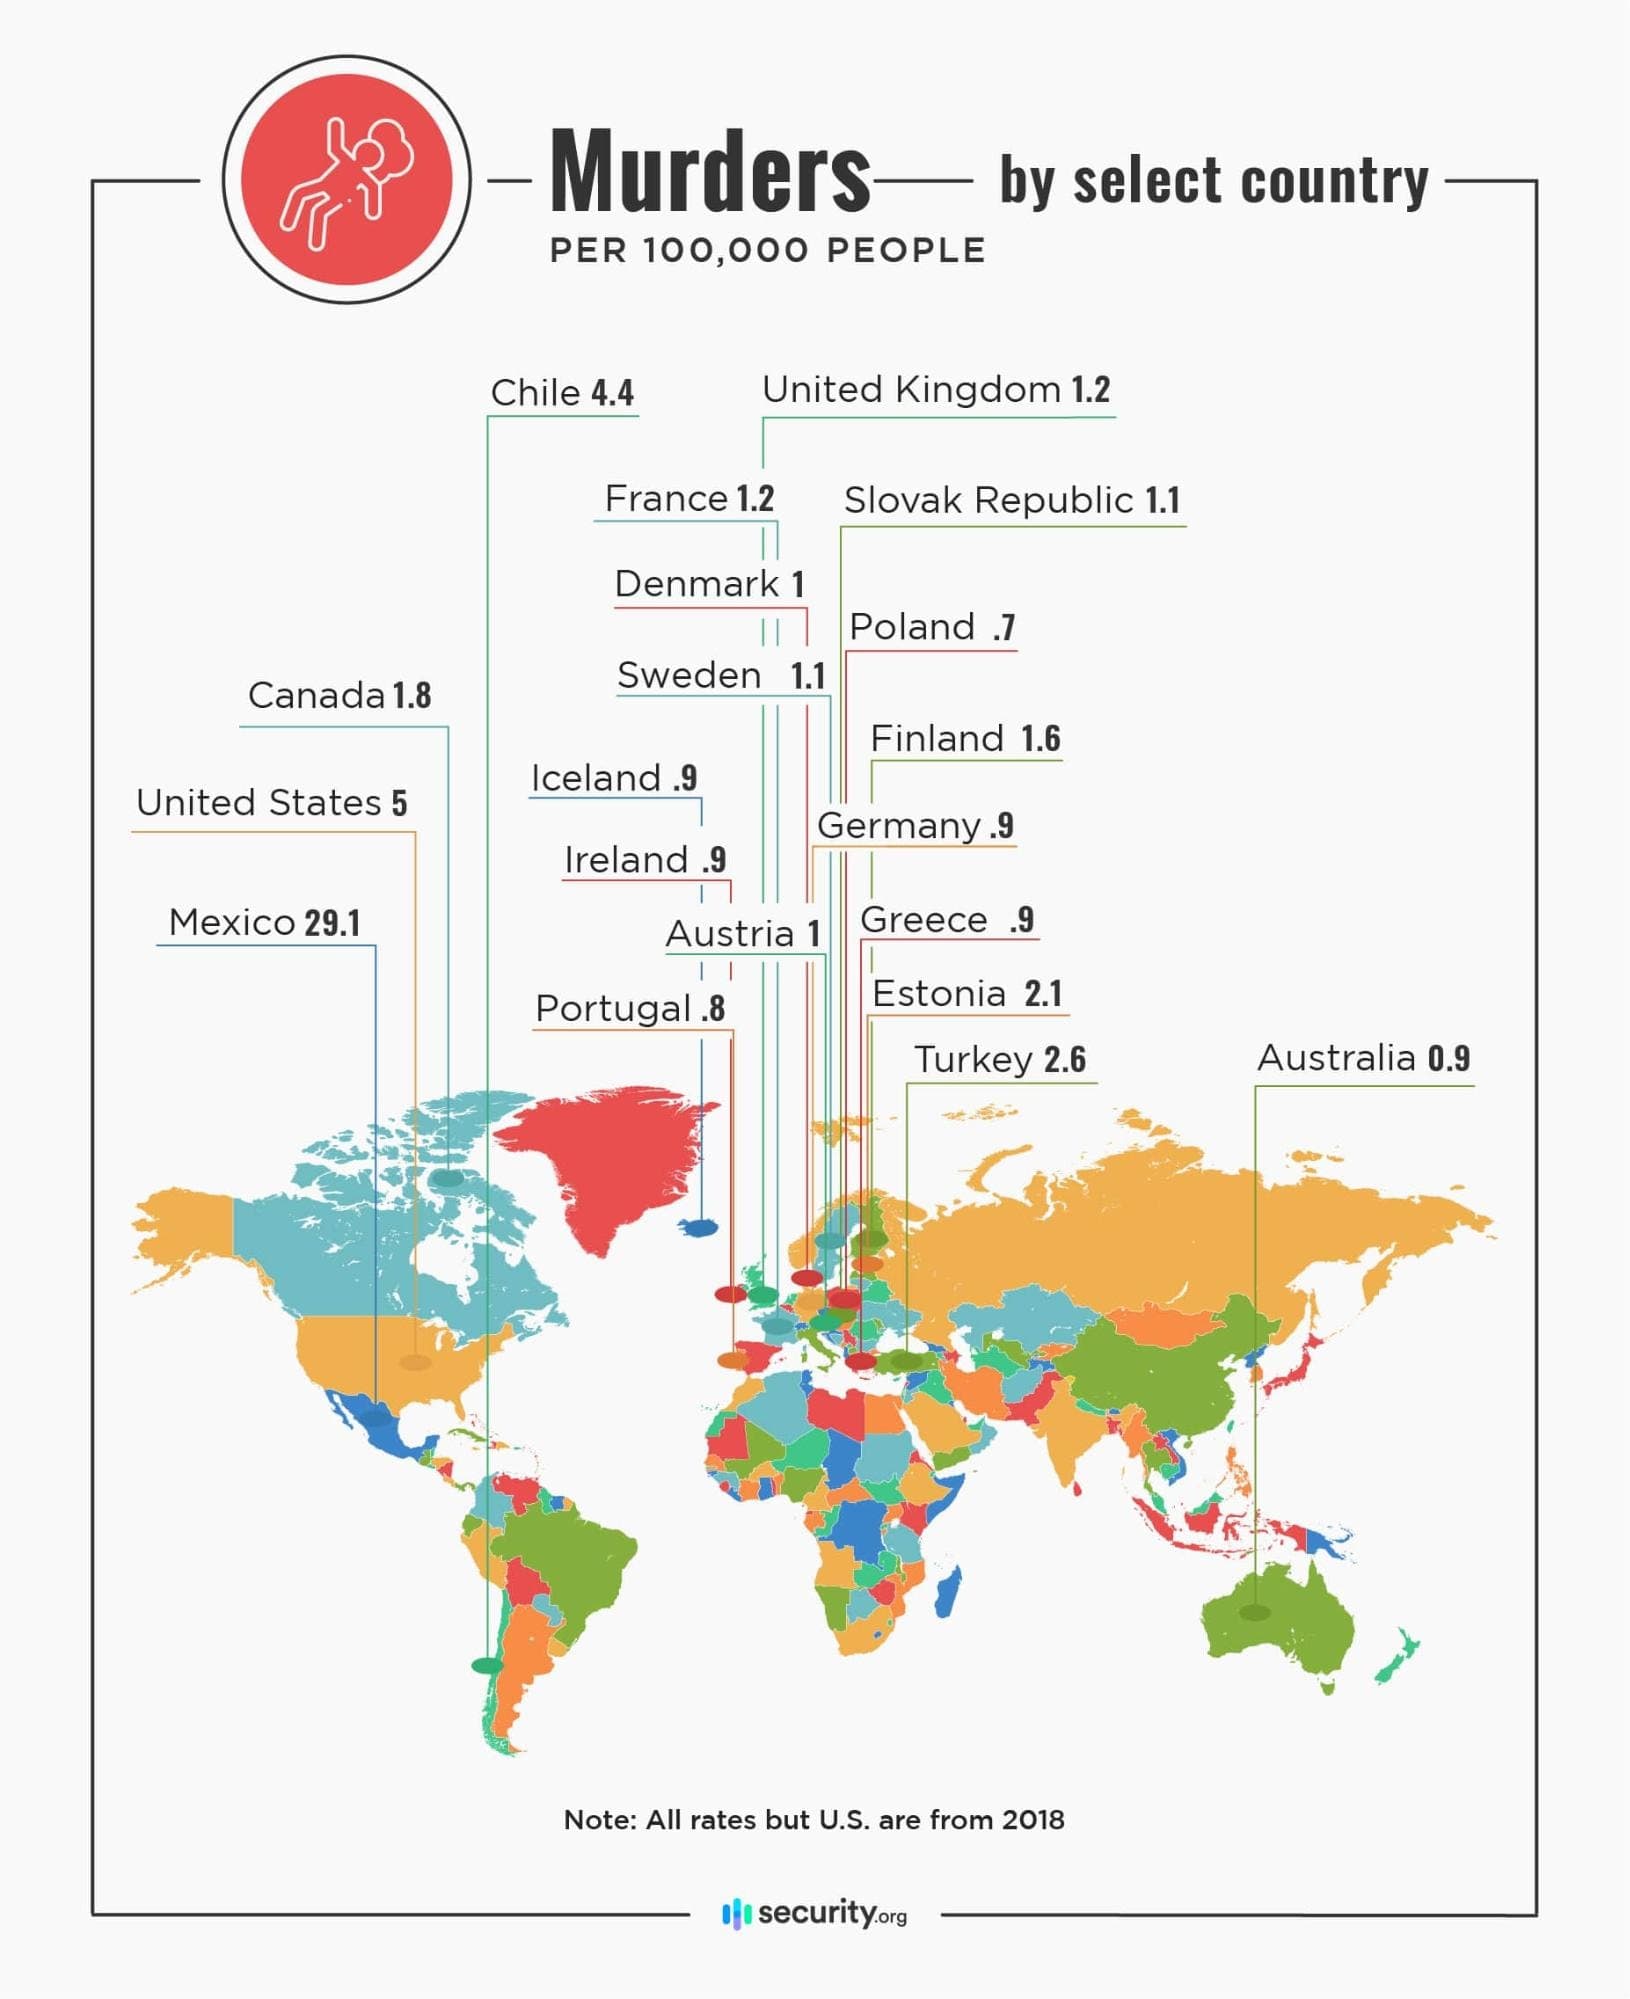 Murders per 100k people by select country